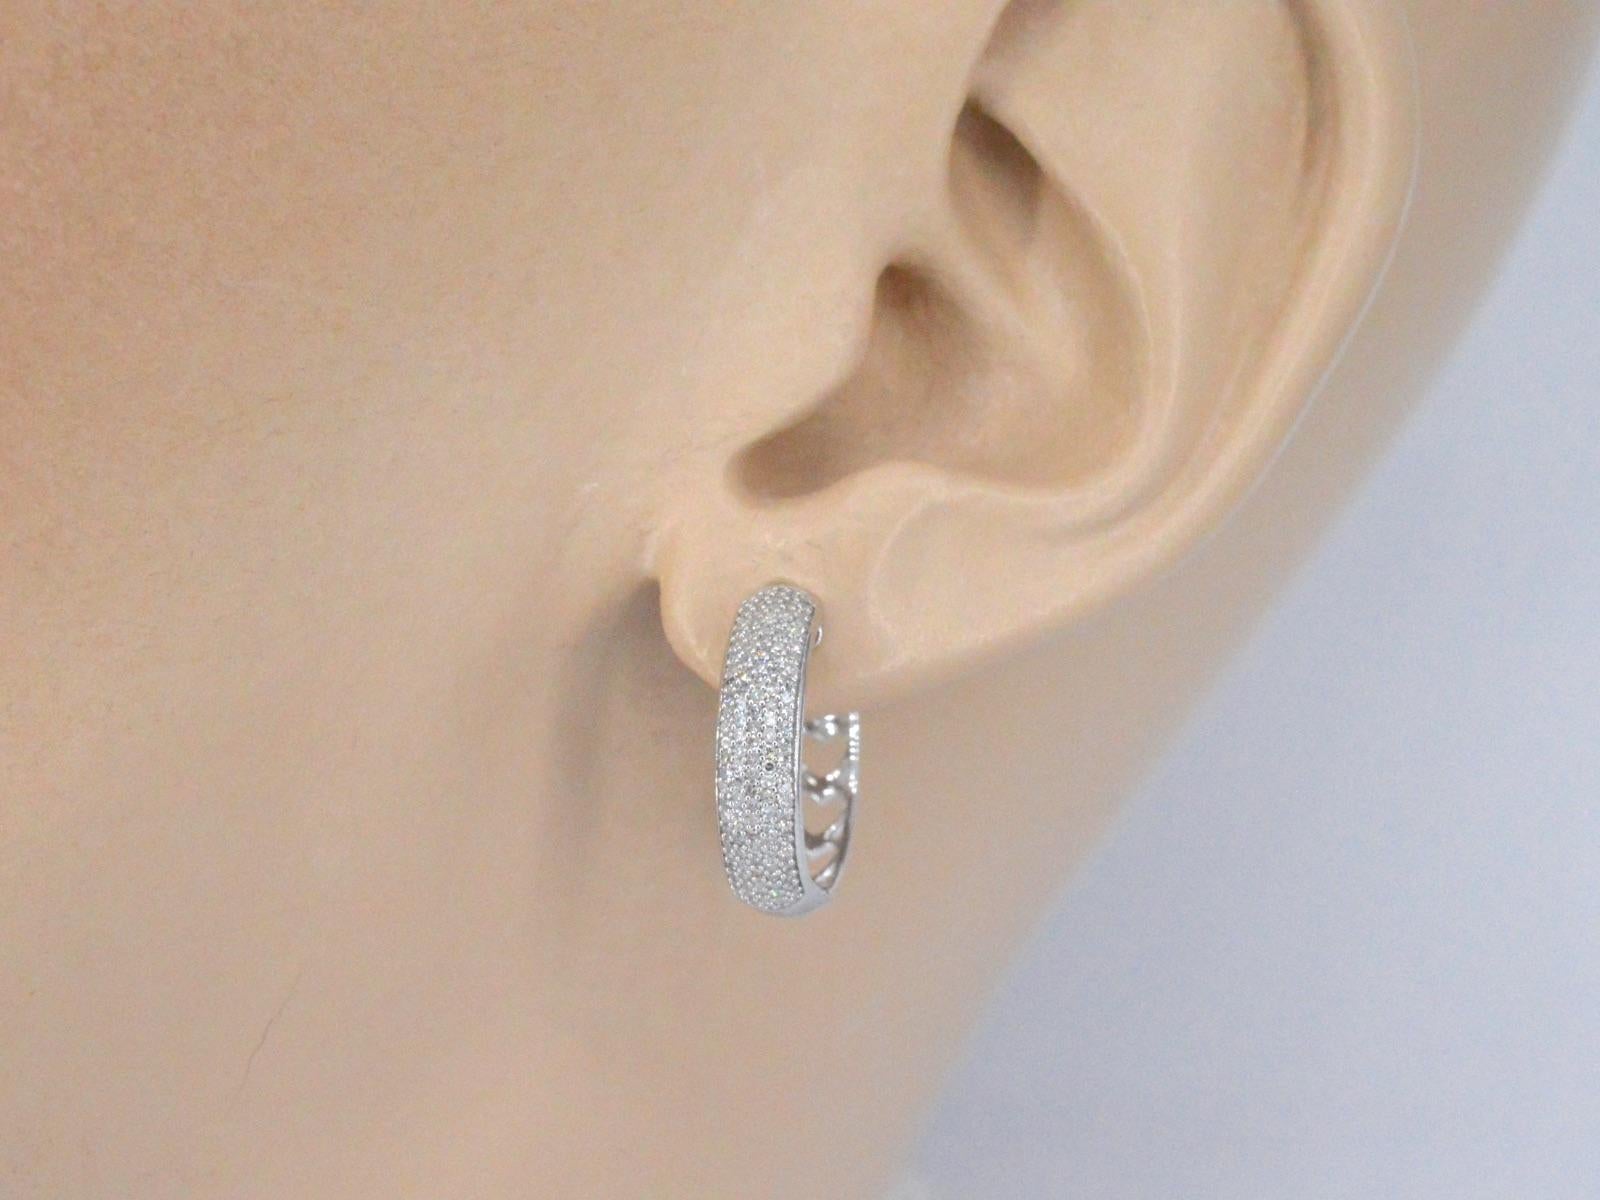 14K white gold earrings with real diamonds are a beautiful and high-quality piece of jewelry that combines the durability of 14K white gold with the beauty of real diamonds. The diamonds are expertly cut to maximize their sparkle and brilliance,